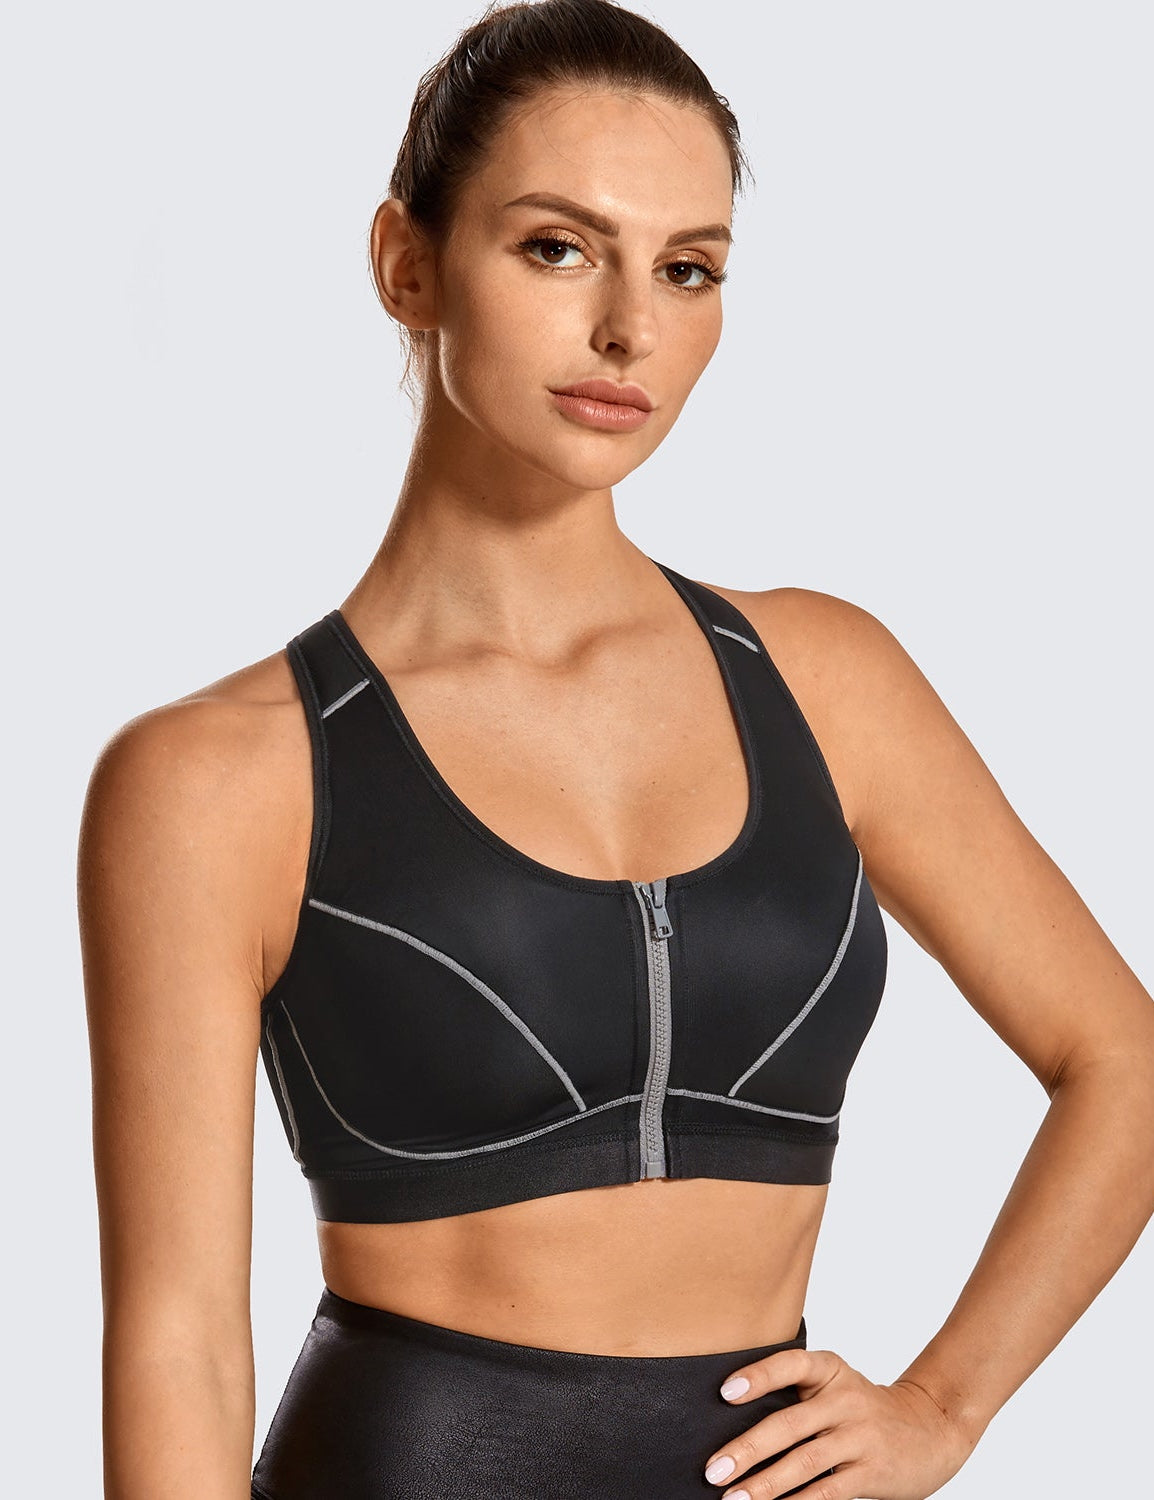 32D SYROKAN Sports Bra Front Adjustable High Impact Support Padded Wireless